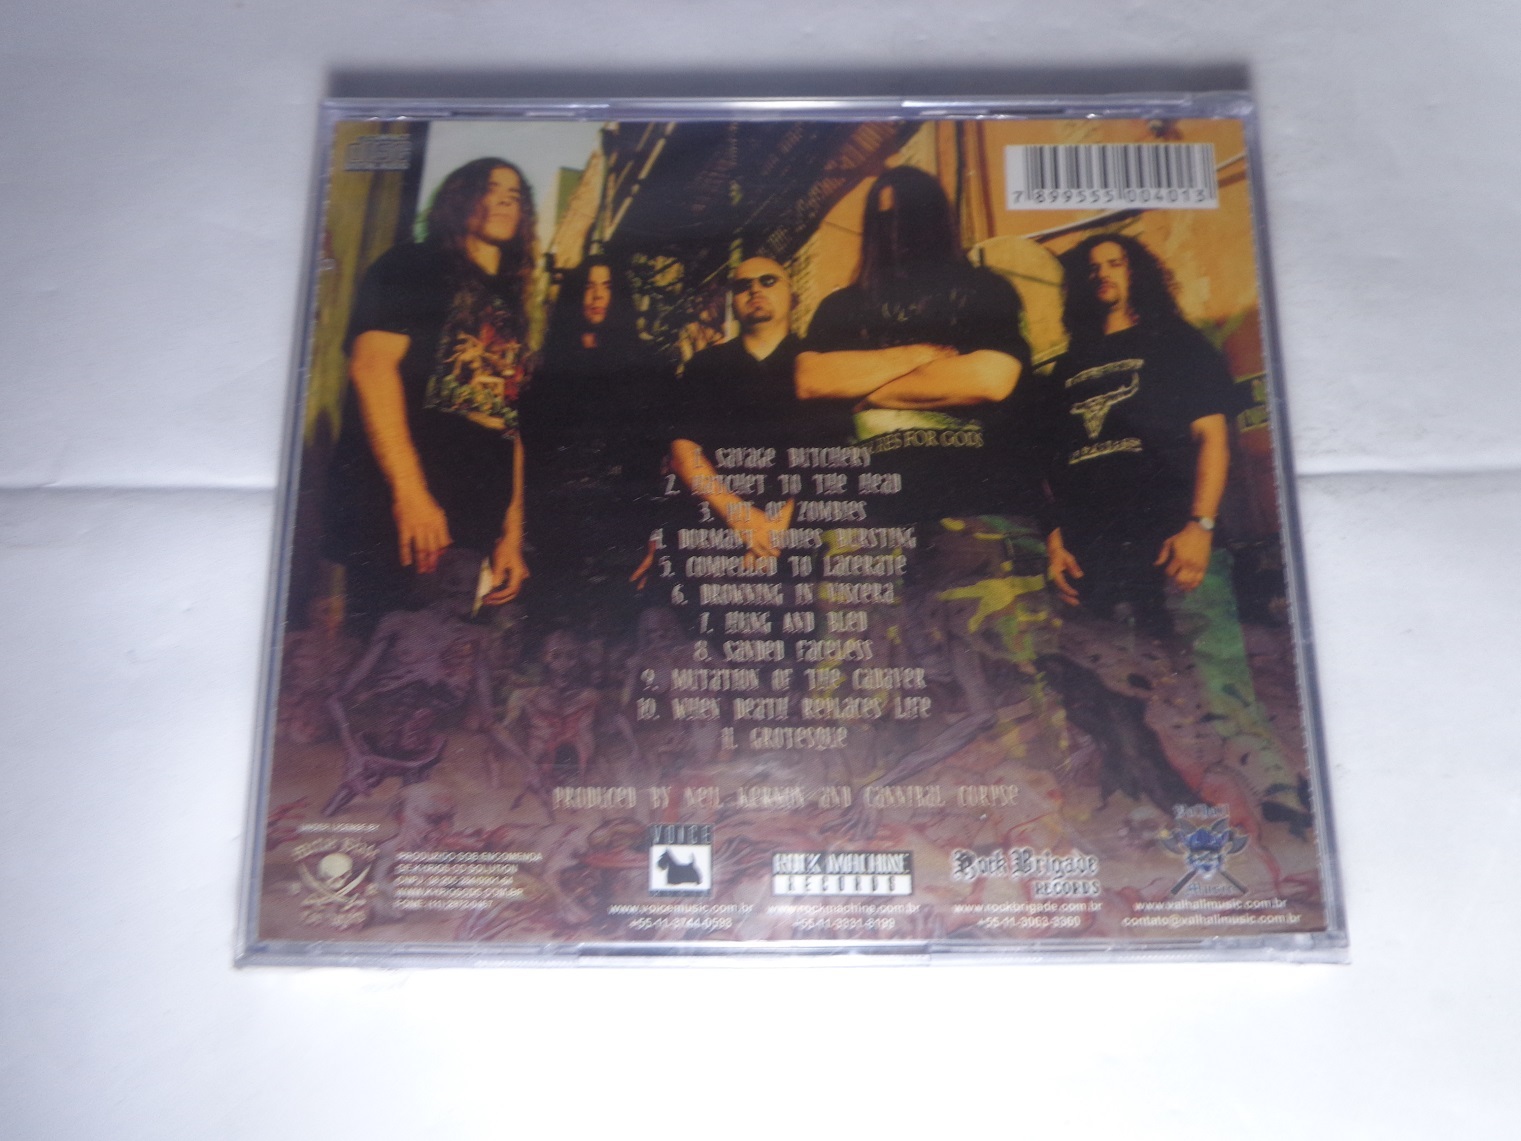 CD - Cannibal Corpse - Gore Obsessed (lacrado)